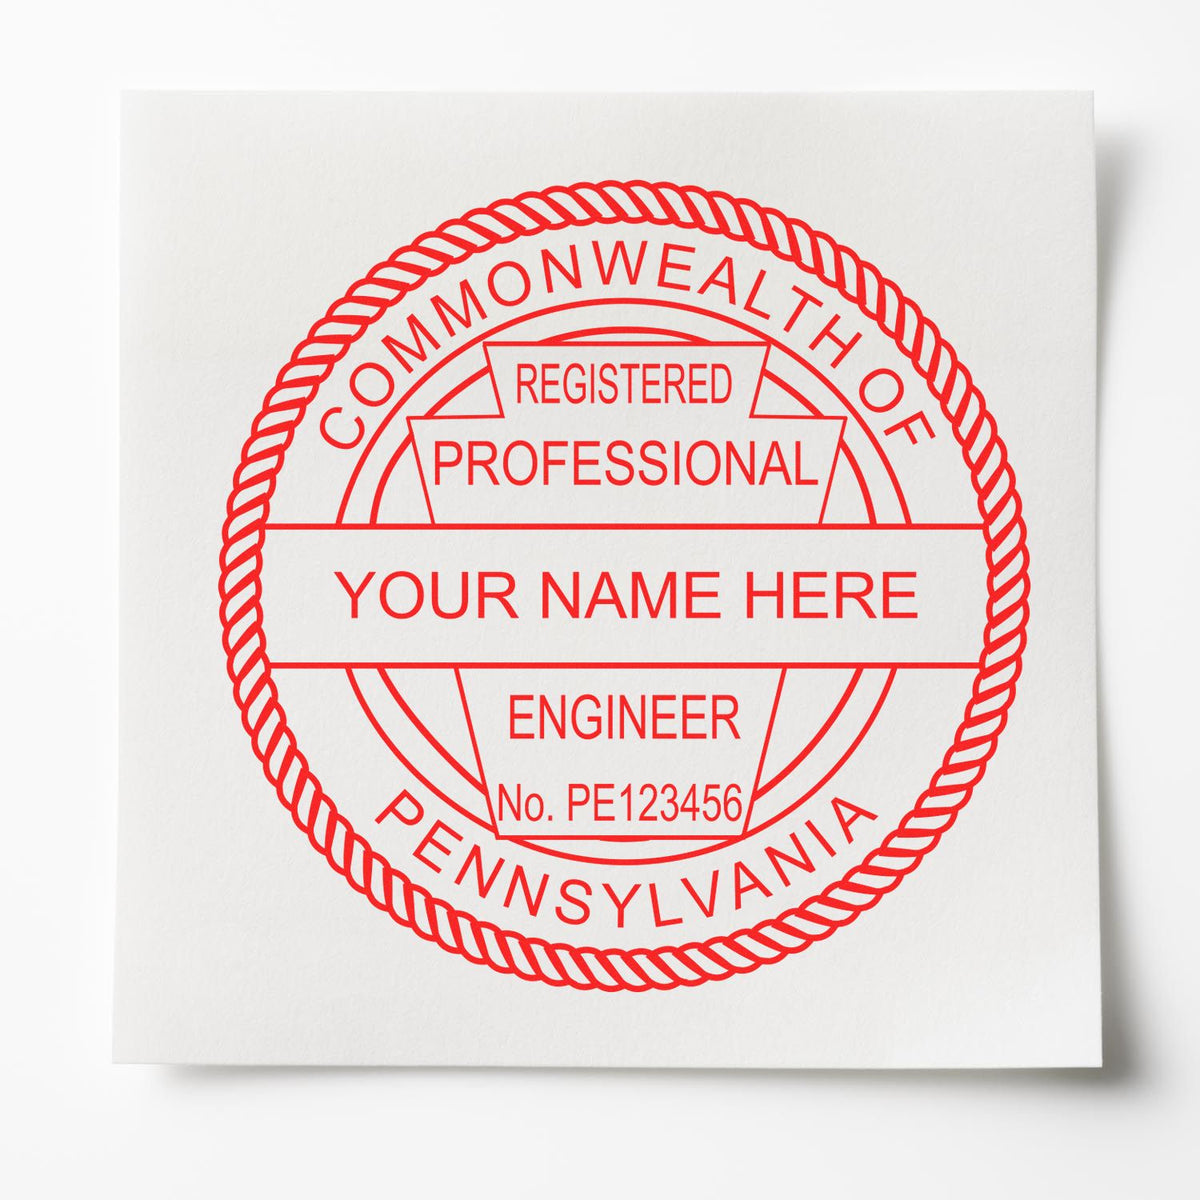 A lifestyle photo showing a stamped image of the Pennsylvania Professional Engineer Seal Stamp on a piece of paper